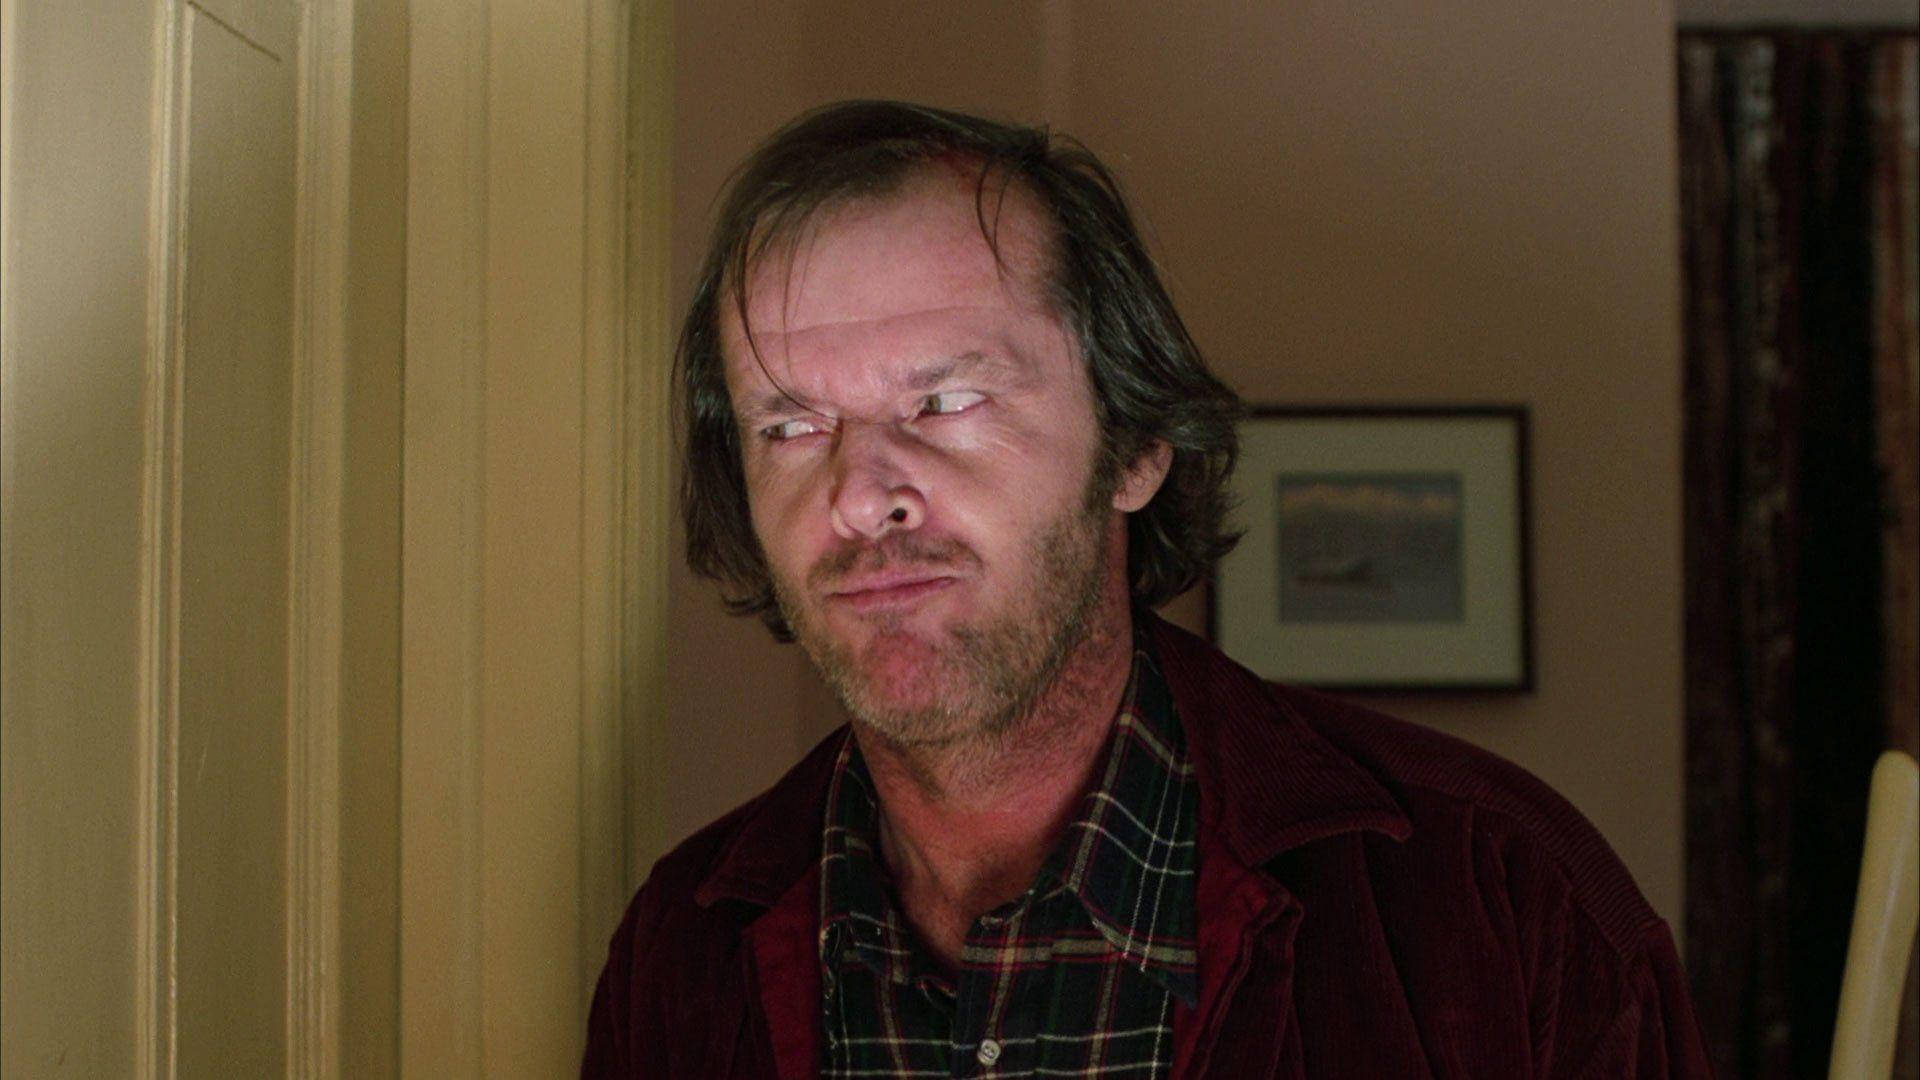 The Shining 1920X1080 Wallpaper and Background Image